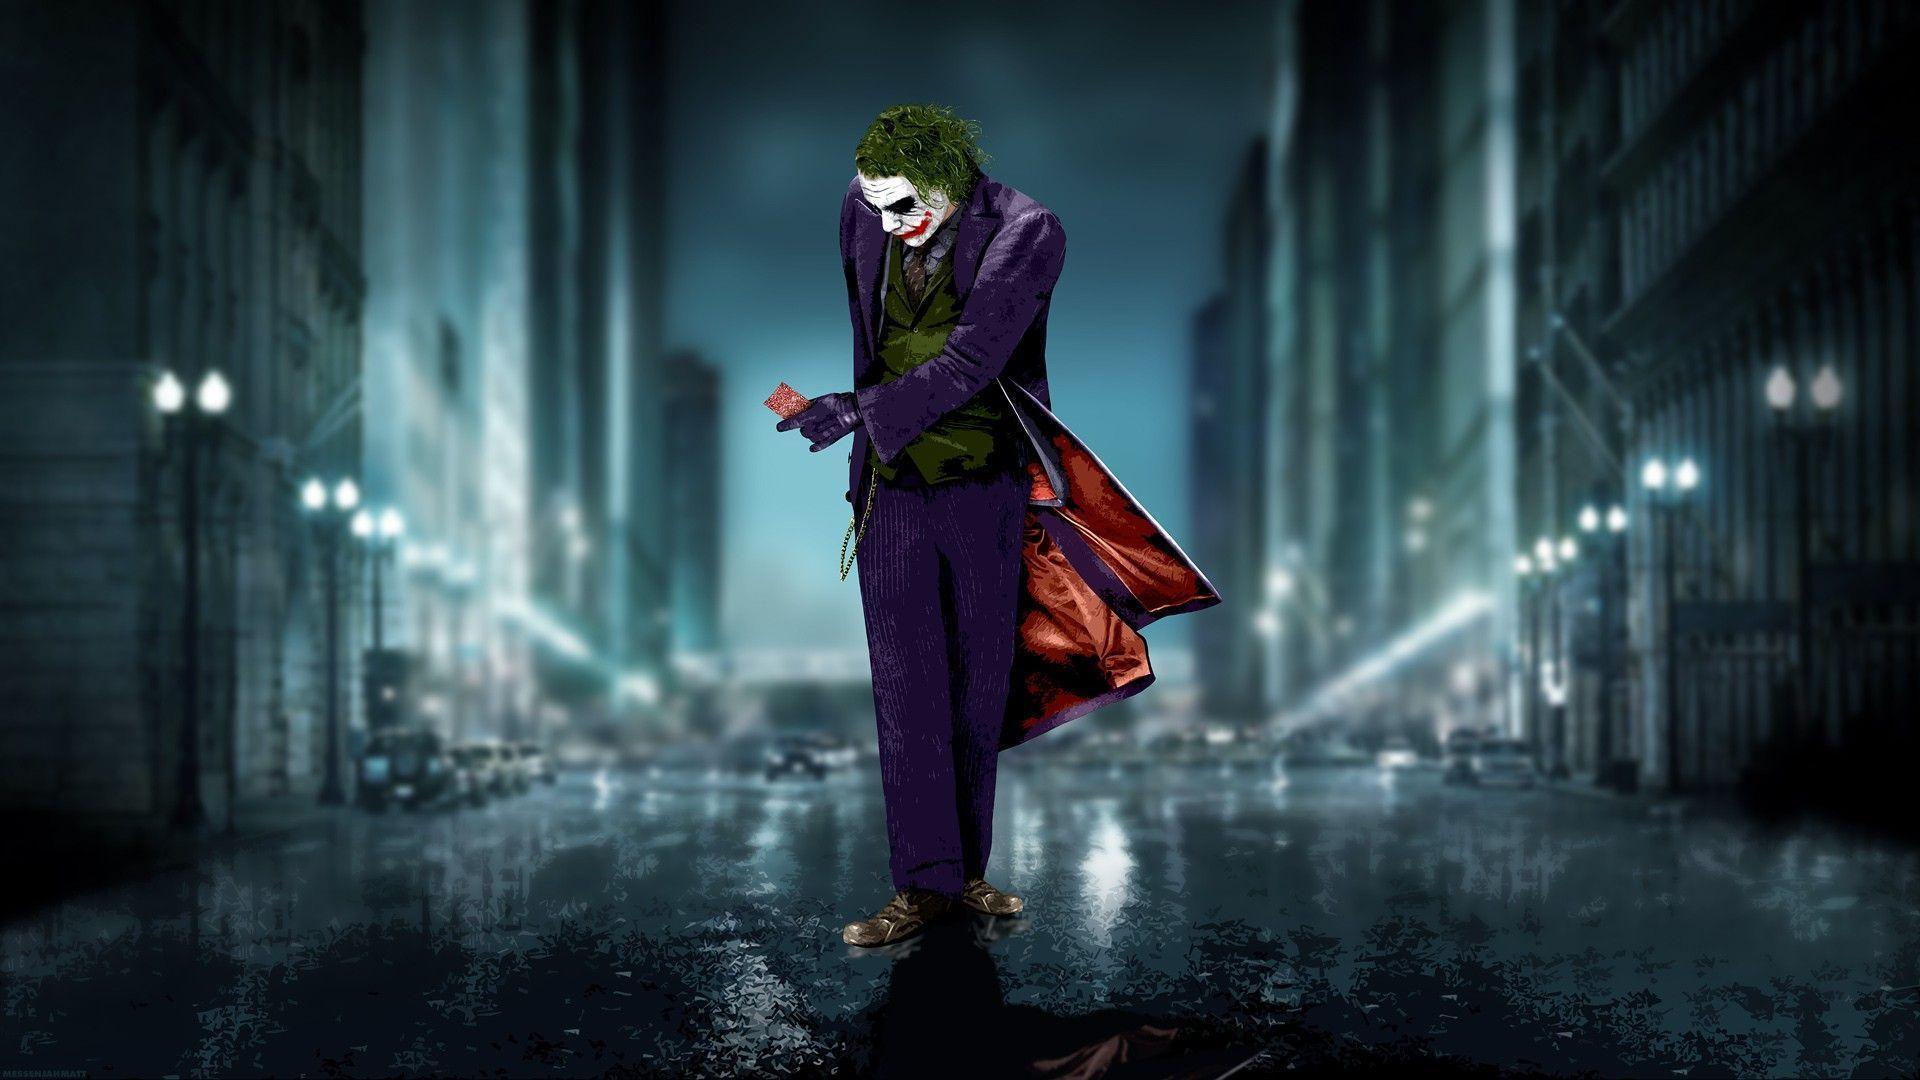 44 Joker Wallpapers HD 4K 5K for PC and Mobile  Download free images  for iPhone Android